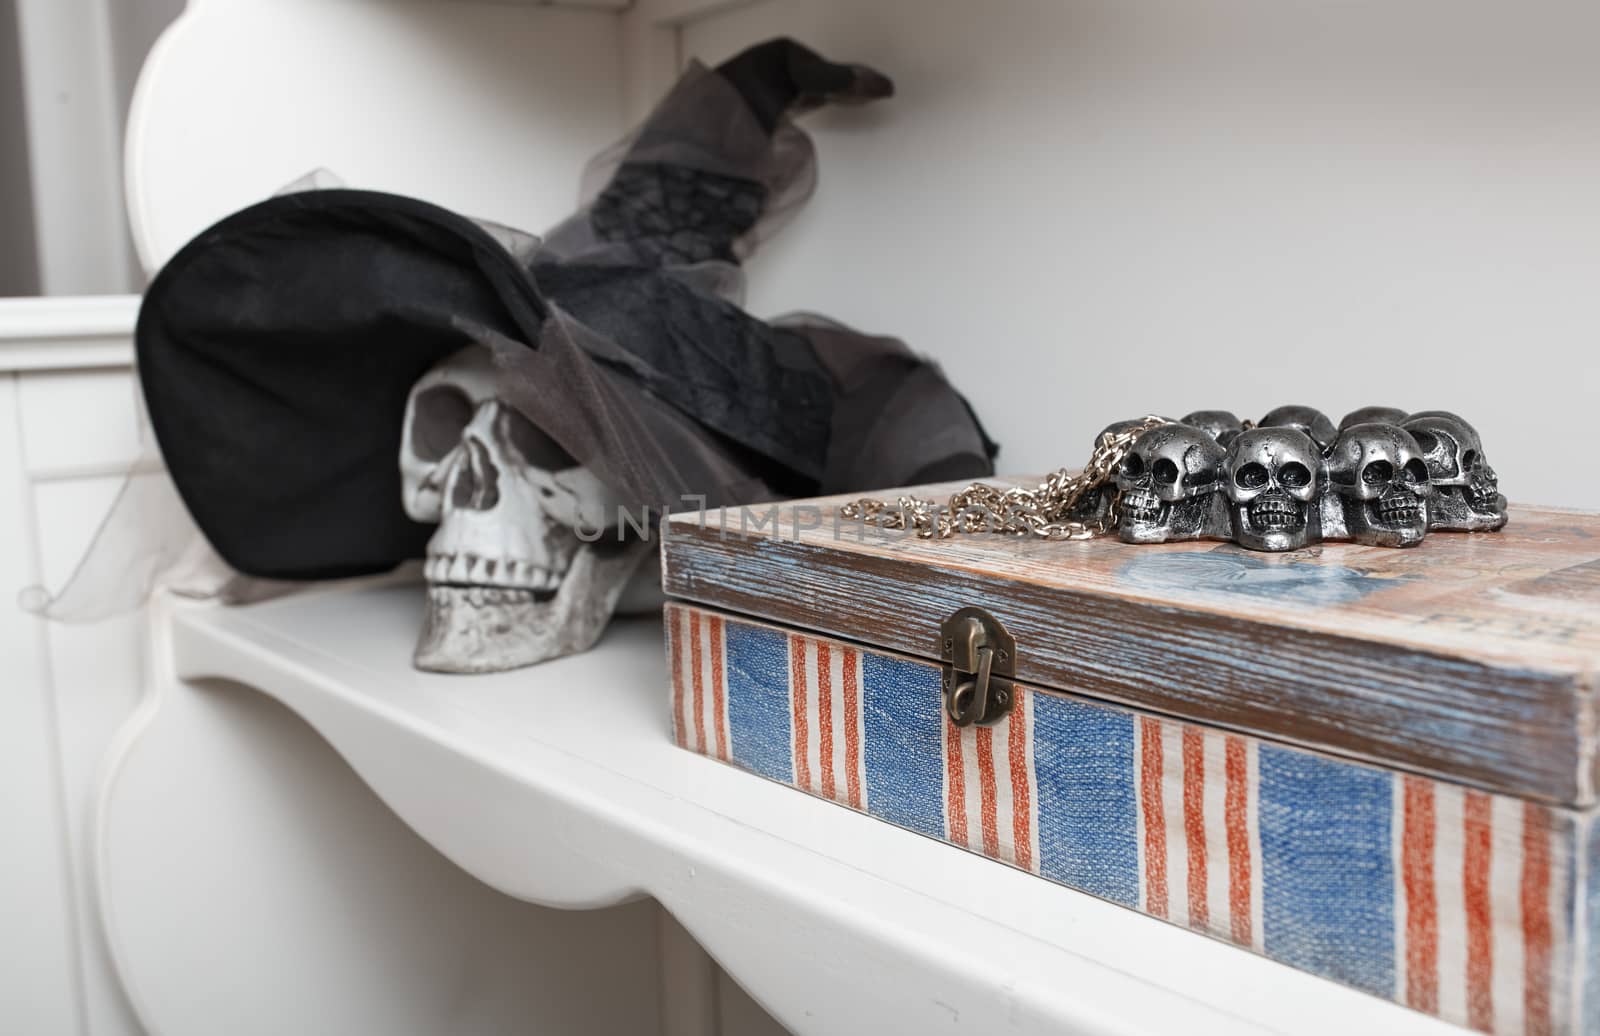 Human skull in a white cabinet. Halloween theme